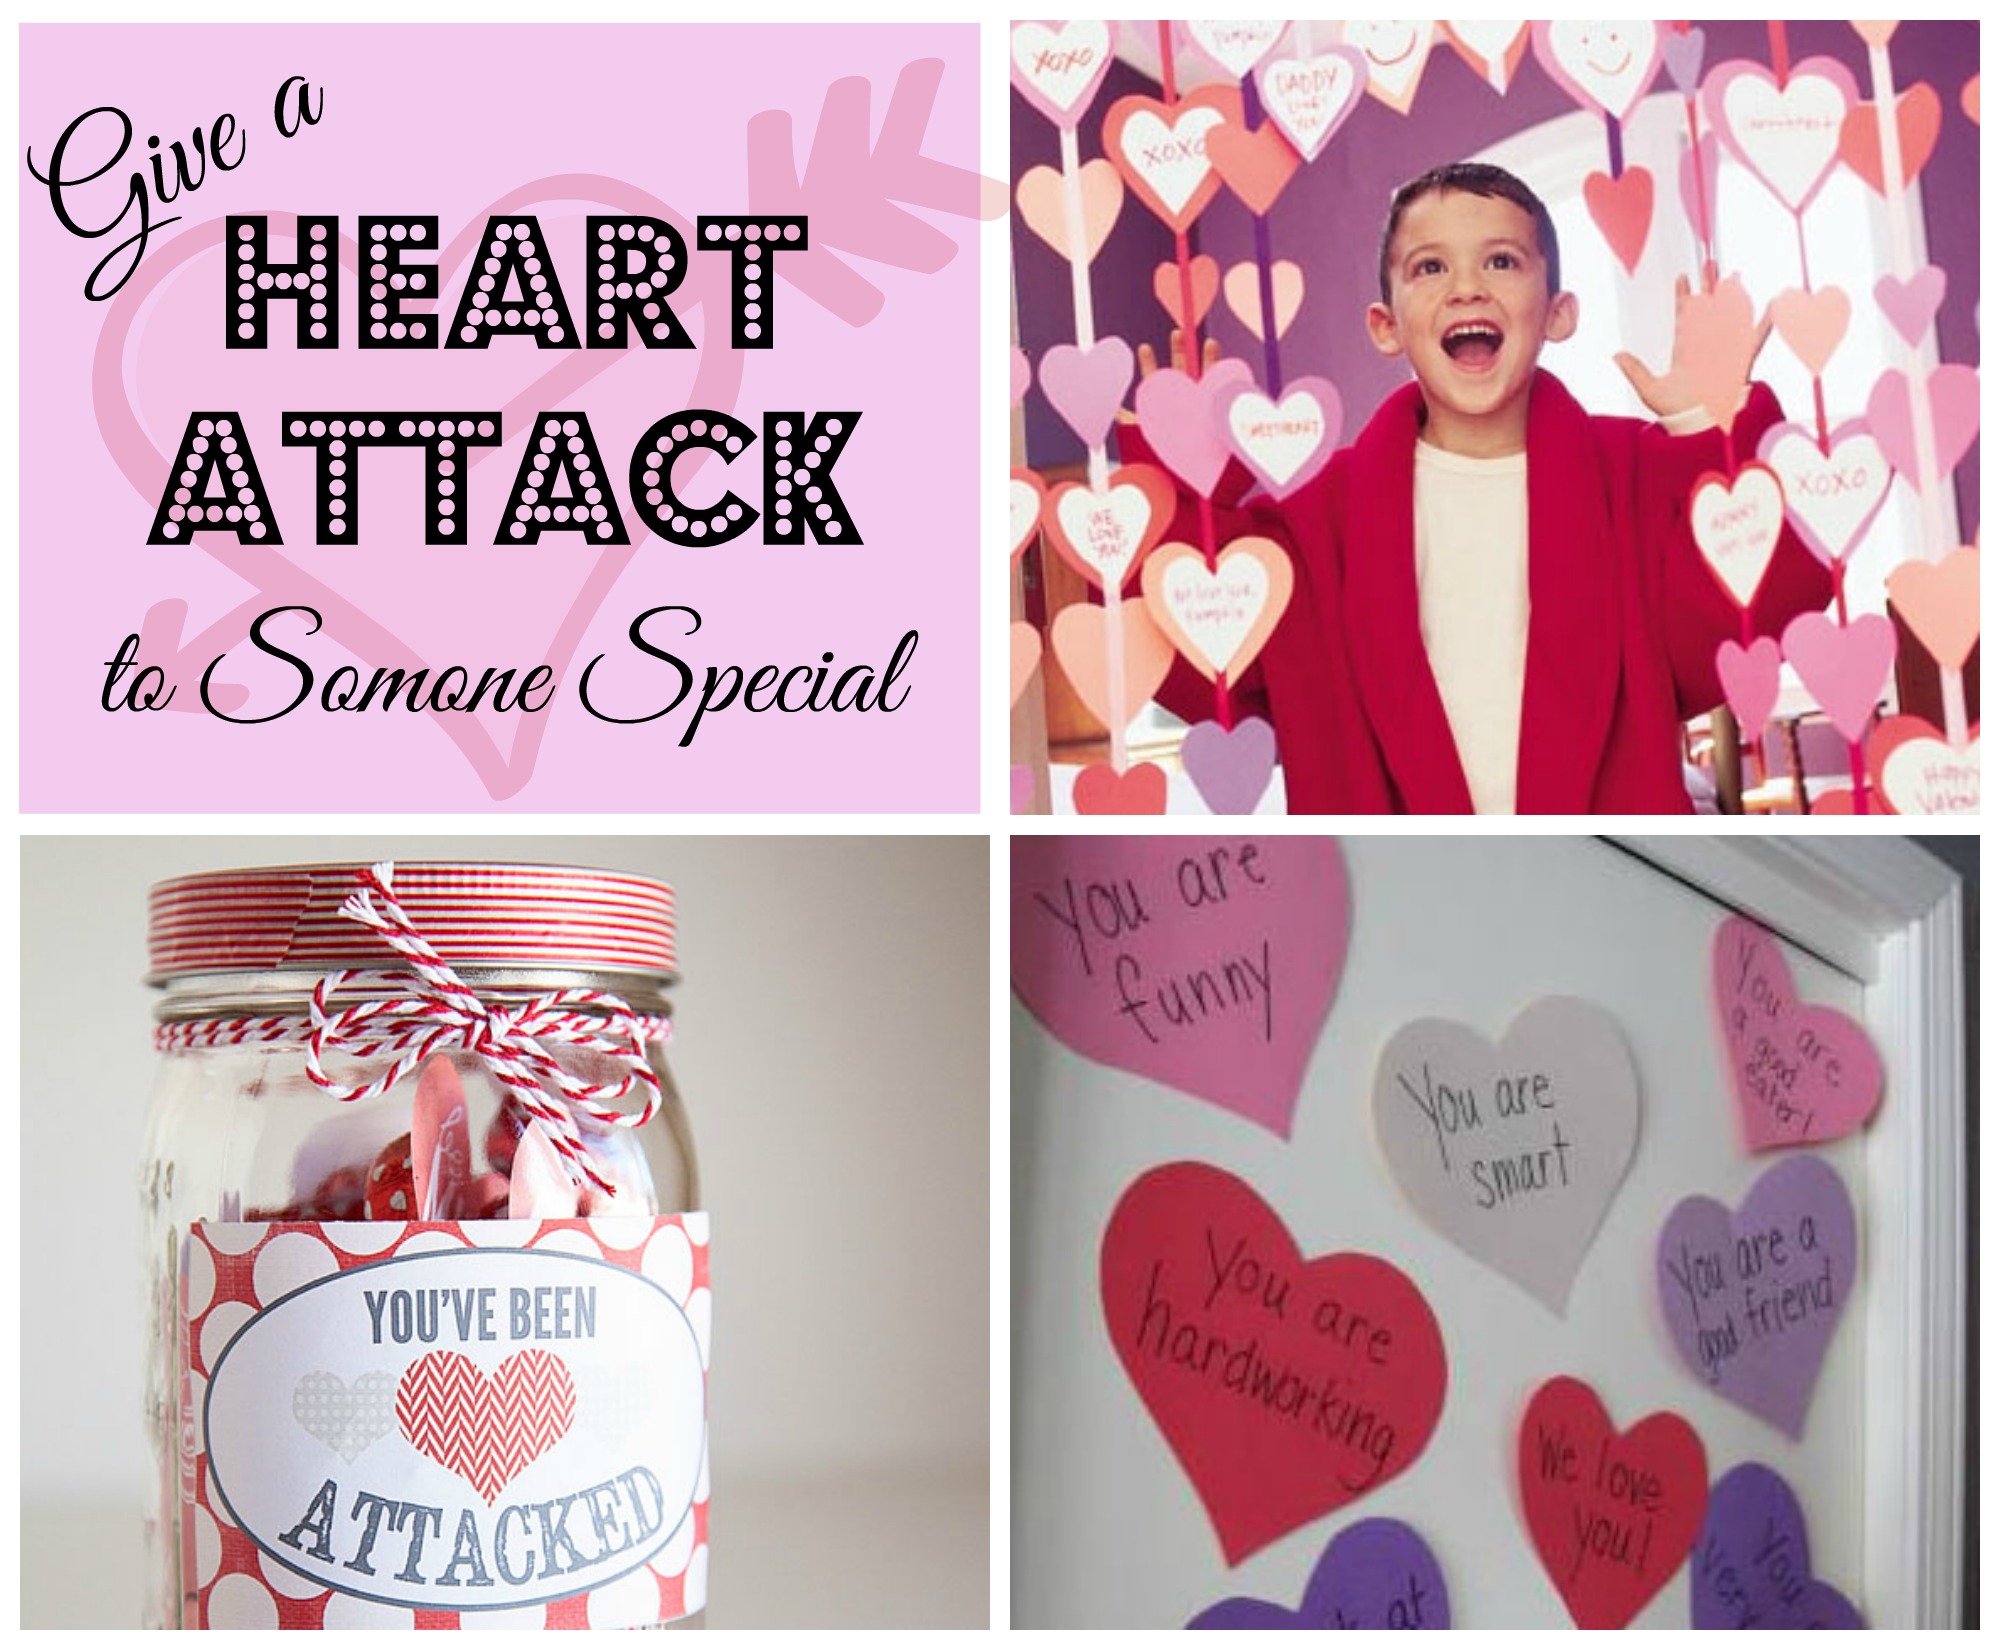 Heart Attack for Valentine's Day